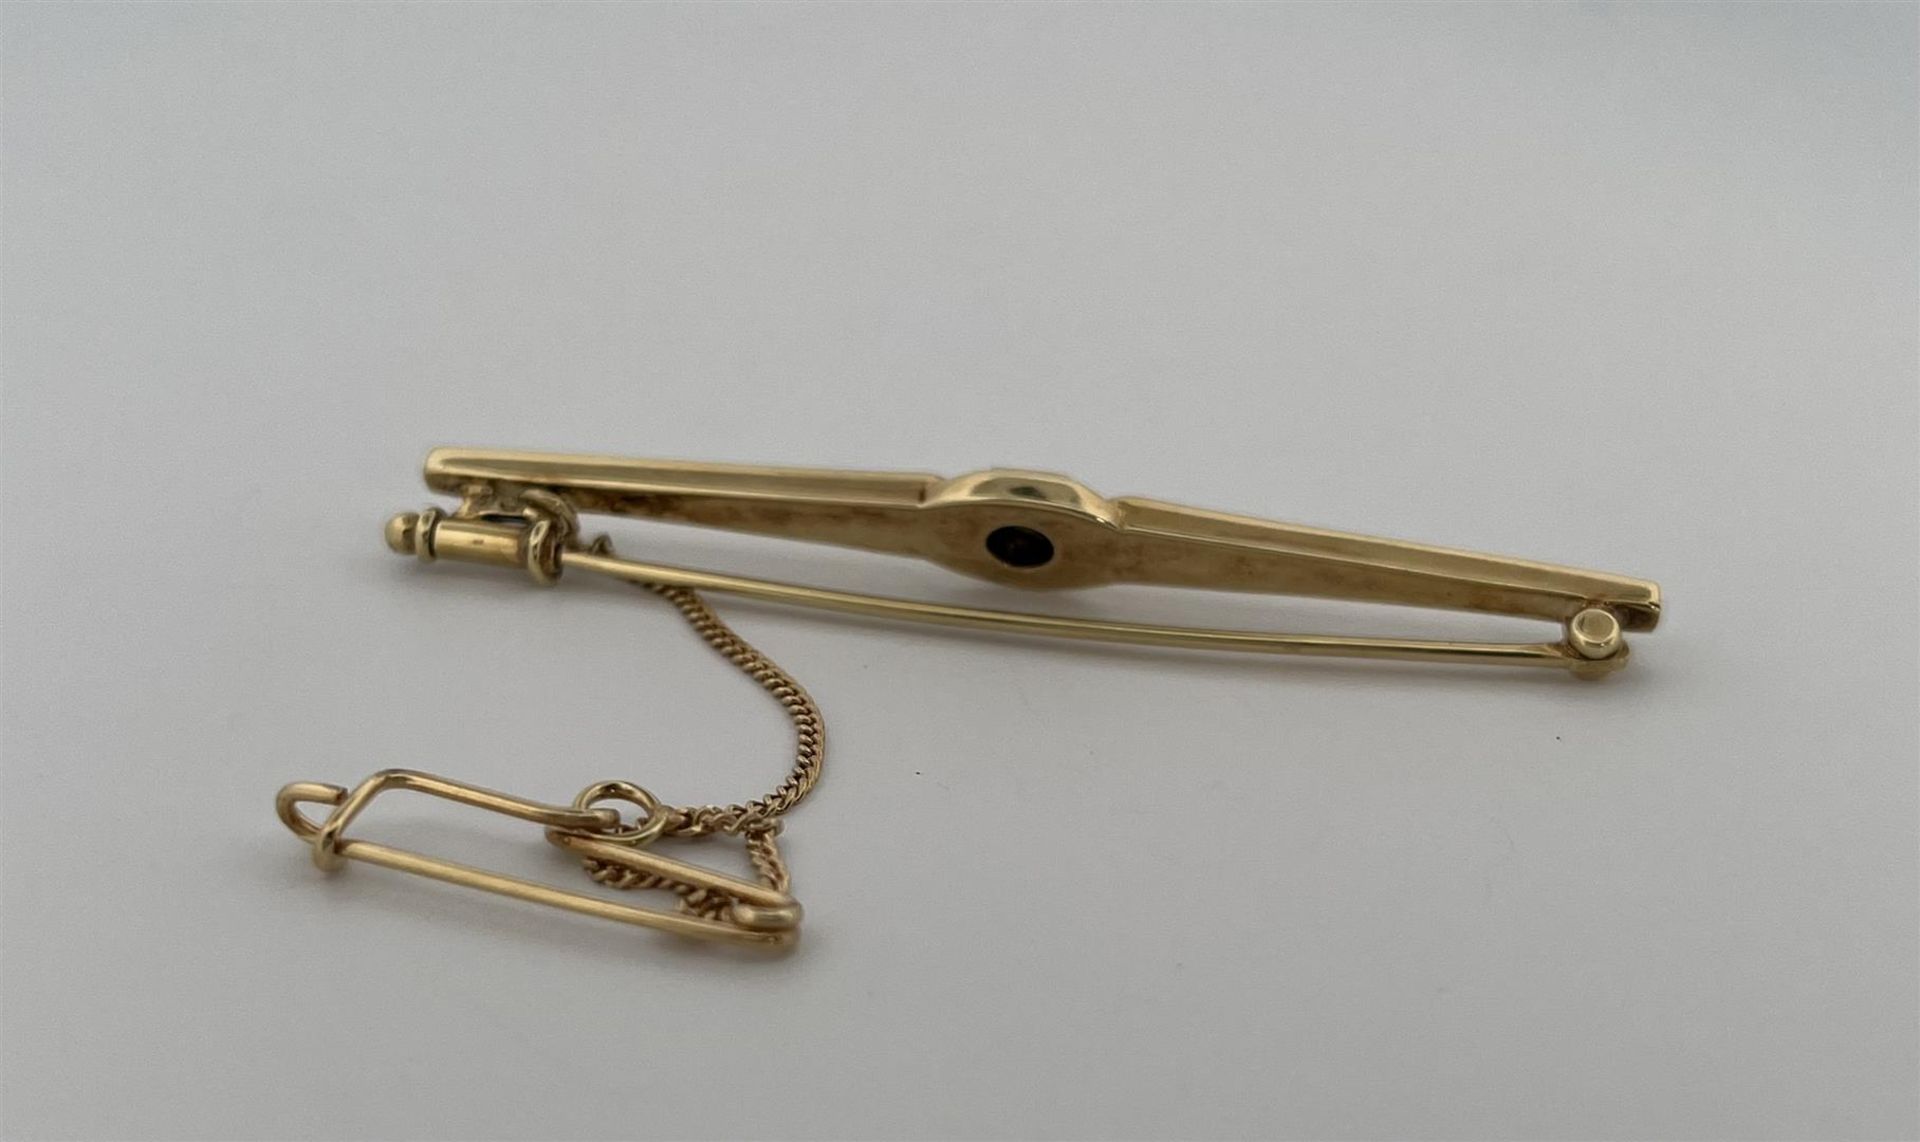 14kt yellow gold tie pin set with diamonds.
Beautiful tie pin with extra safety chain and pin, the t - Bild 3 aus 4